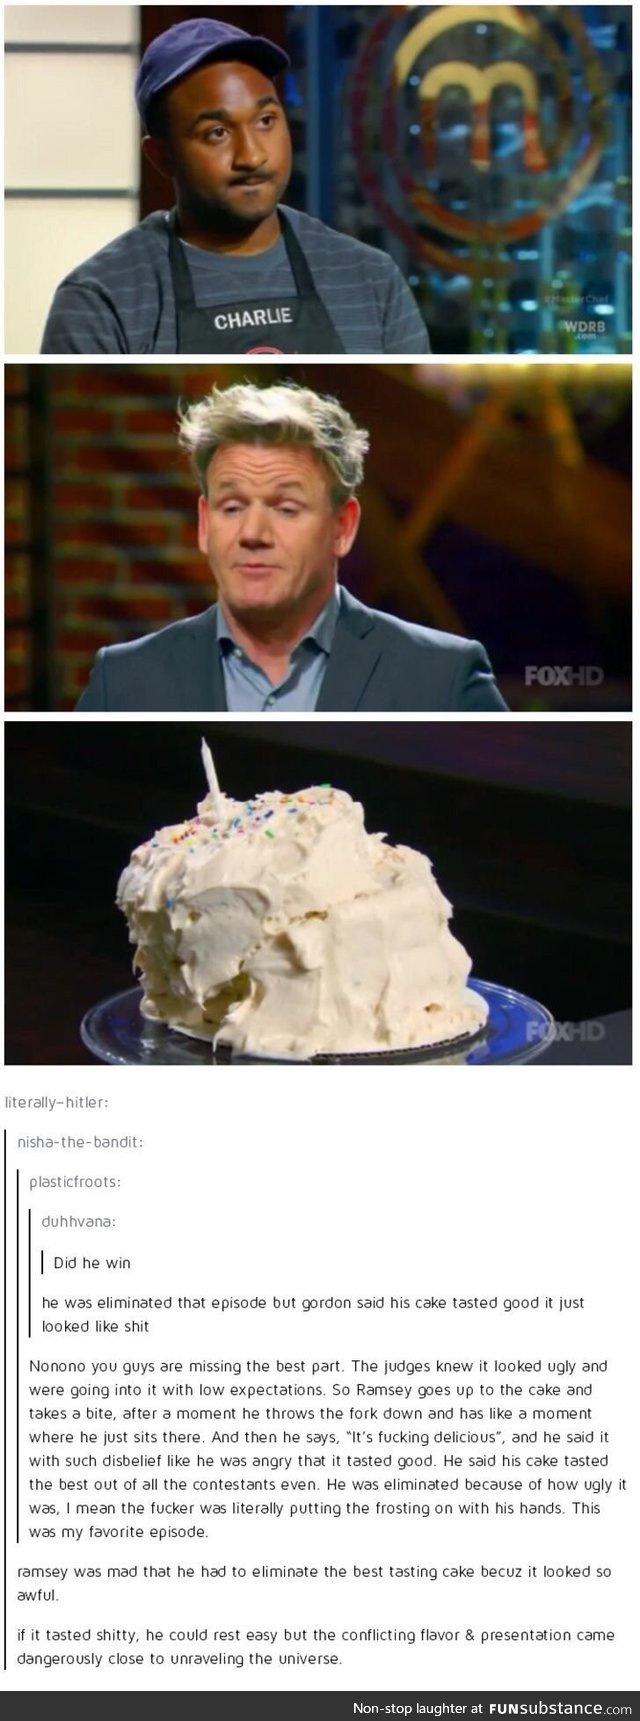 The cake was a lie